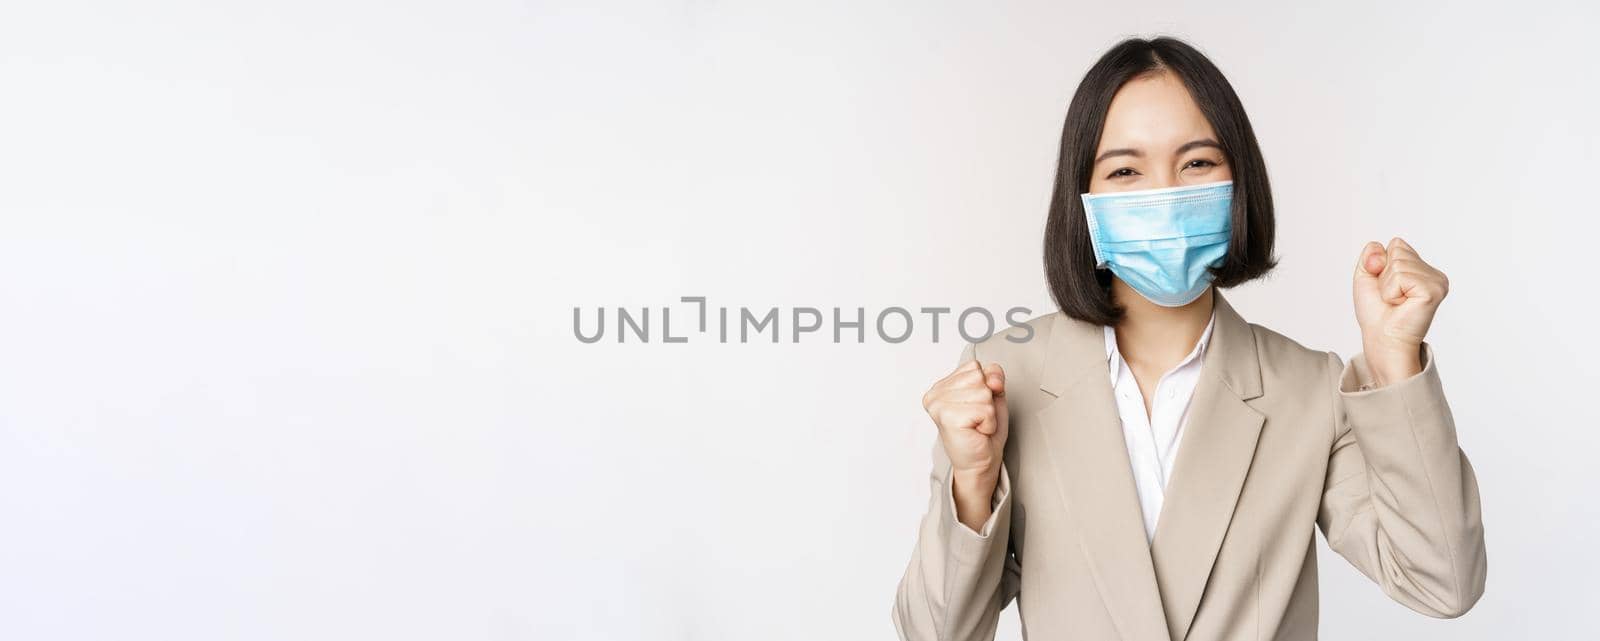 Coronavirus and business people concept. Happy businesswoman in medical face mask dancing, celebrating success, achievement, standing over white background.